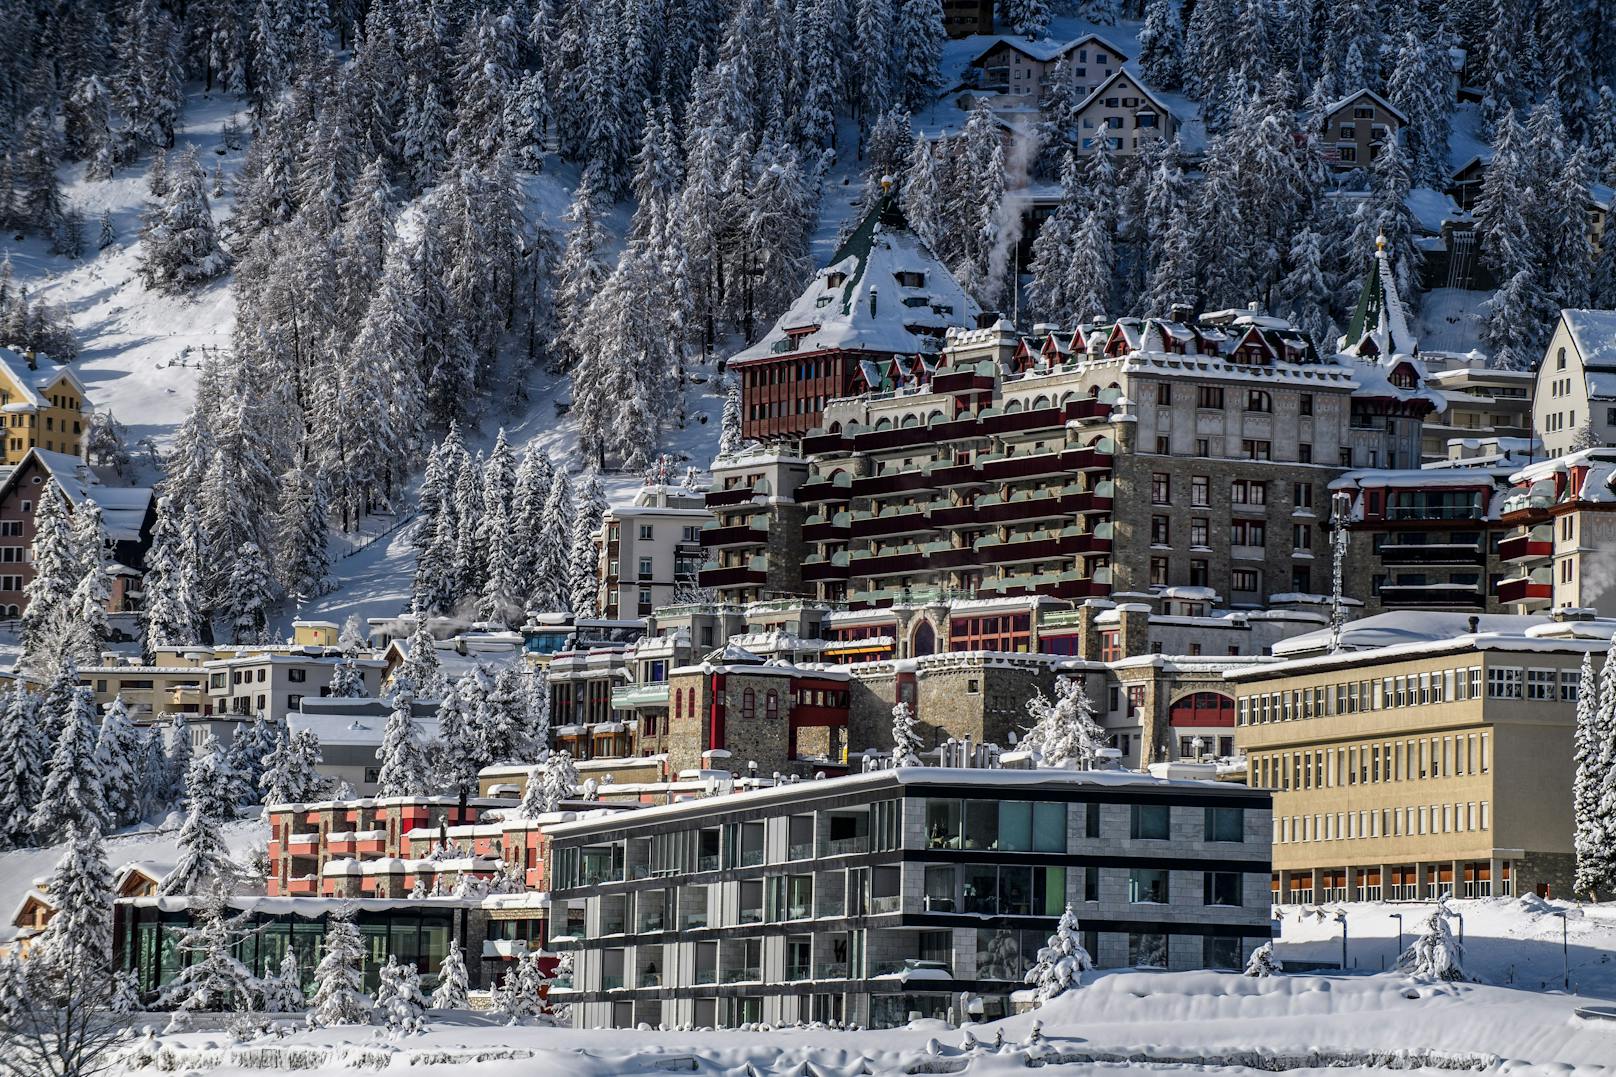 Palace Hotel in St. Moritz